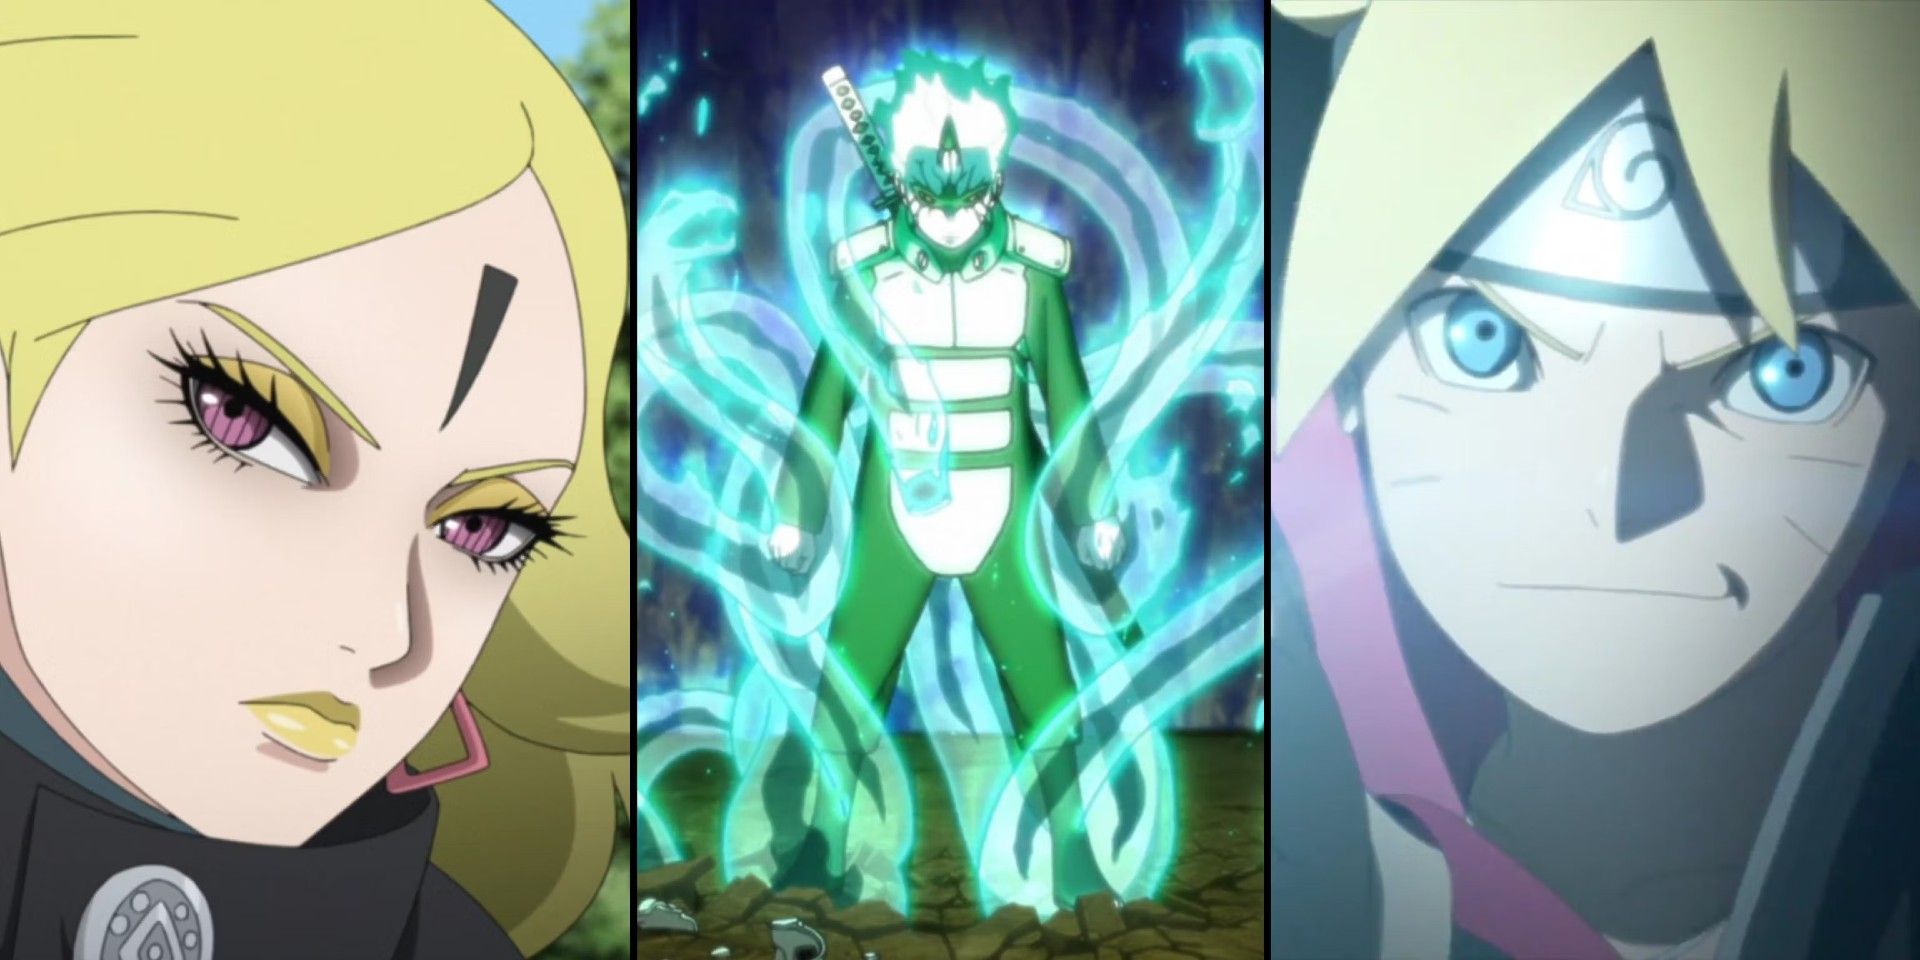 A split image of Delta, Mitsuki, and Boruto about to engage in a battle.